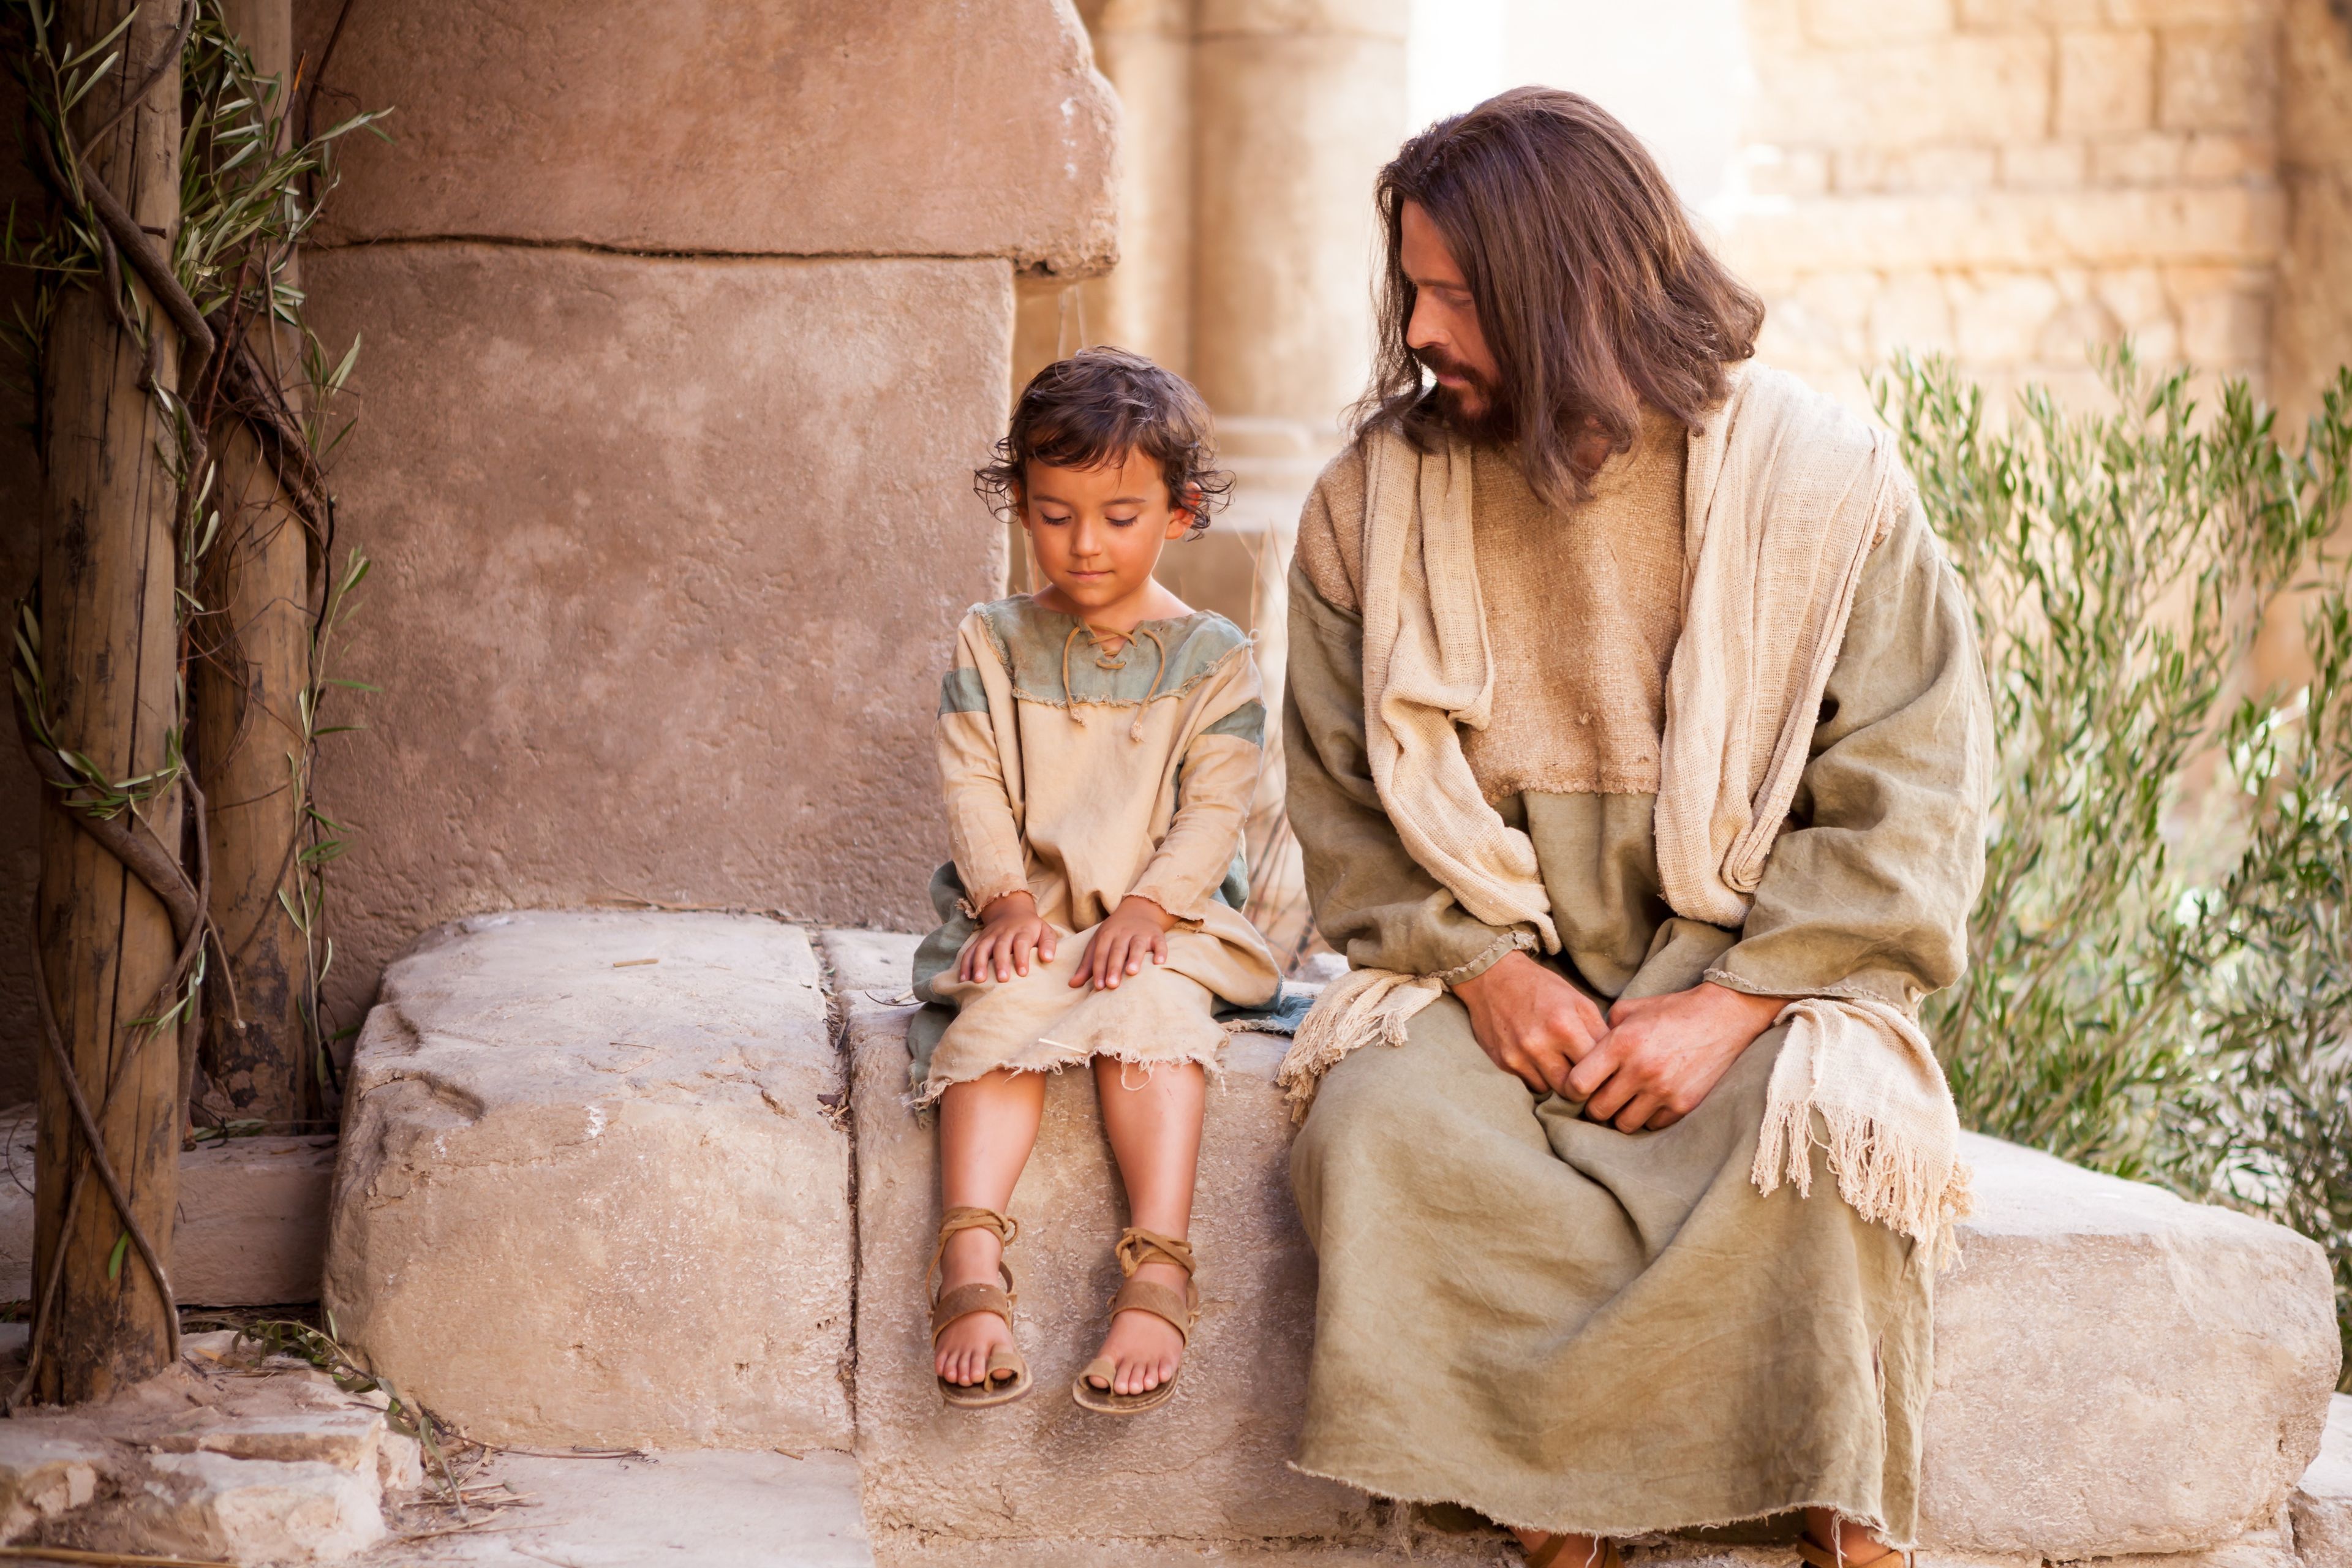 Christ sits with a young child while teaching that we must “become as little children.”